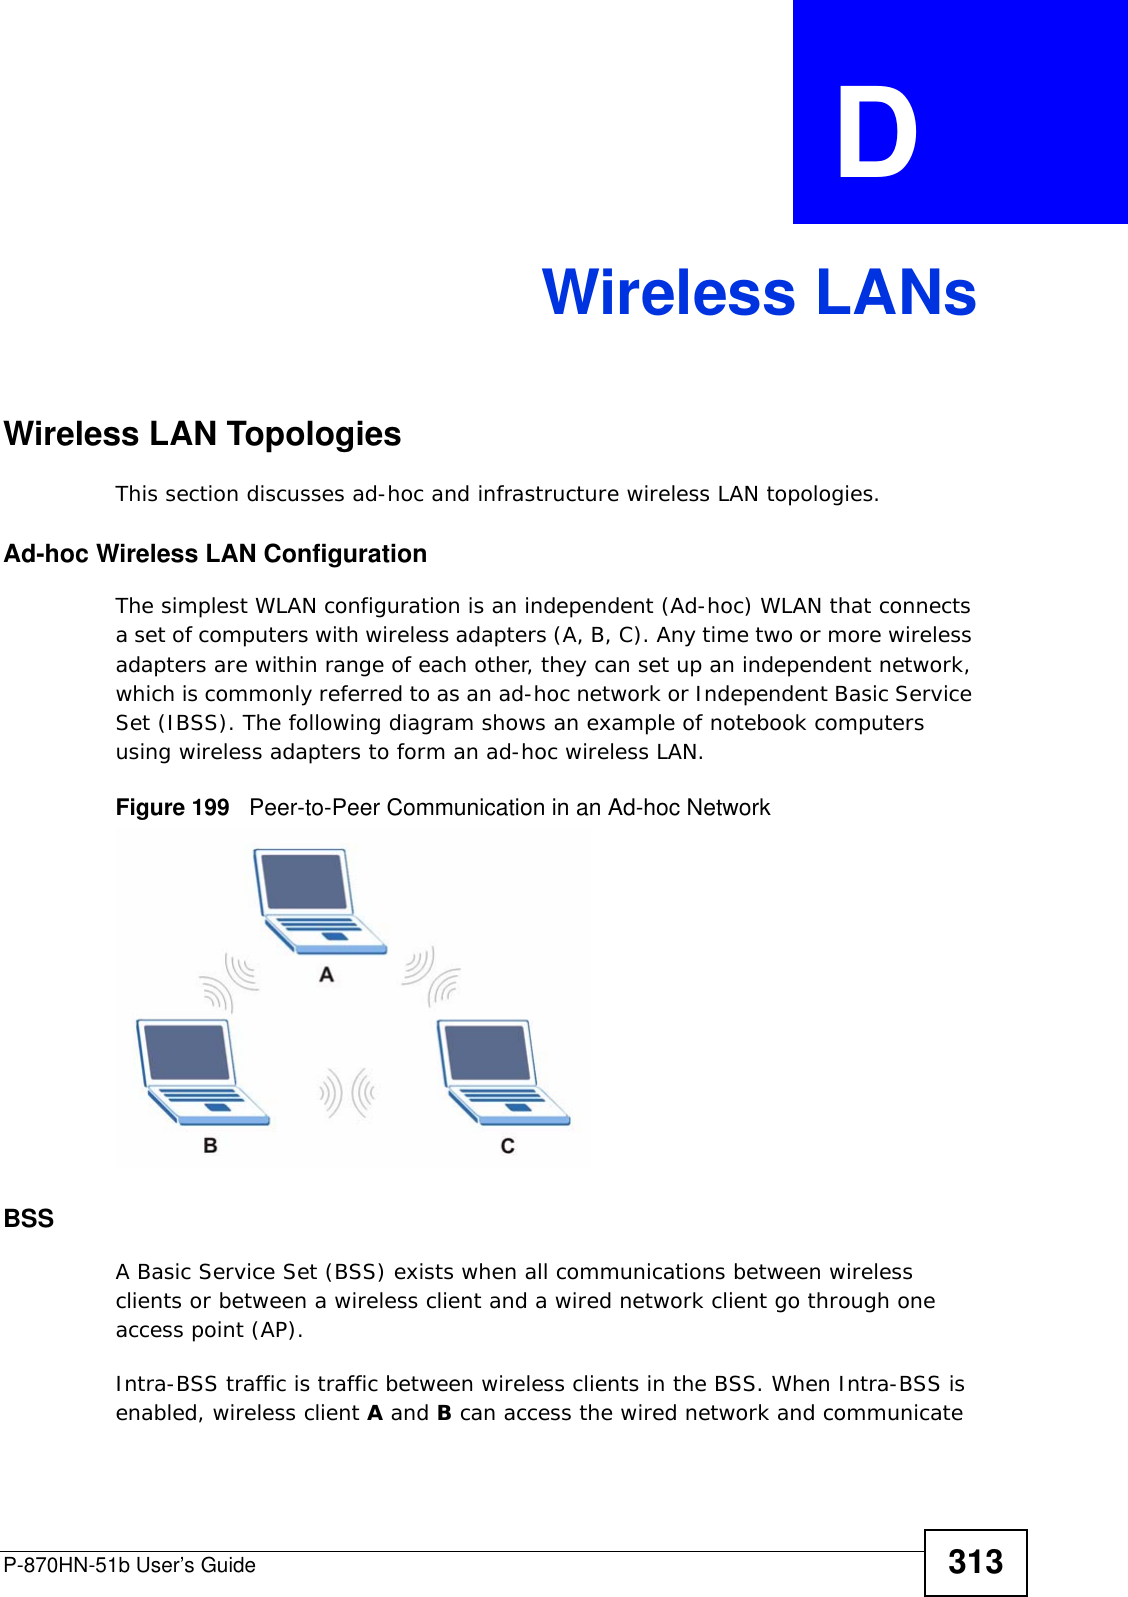 P-870HN-51b User’s Guide 313APPENDIX  D Wireless LANsWireless LAN TopologiesThis section discusses ad-hoc and infrastructure wireless LAN topologies.Ad-hoc Wireless LAN ConfigurationThe simplest WLAN configuration is an independent (Ad-hoc) WLAN that connects a set of computers with wireless adapters (A, B, C). Any time two or more wireless adapters are within range of each other, they can set up an independent network, which is commonly referred to as an ad-hoc network or Independent Basic Service Set (IBSS). The following diagram shows an example of notebook computers using wireless adapters to form an ad-hoc wireless LAN. Figure 199   Peer-to-Peer Communication in an Ad-hoc NetworkBSSA Basic Service Set (BSS) exists when all communications between wireless clients or between a wireless client and a wired network client go through one access point (AP). Intra-BSS traffic is traffic between wireless clients in the BSS. When Intra-BSS is enabled, wireless client A and B can access the wired network and communicate 